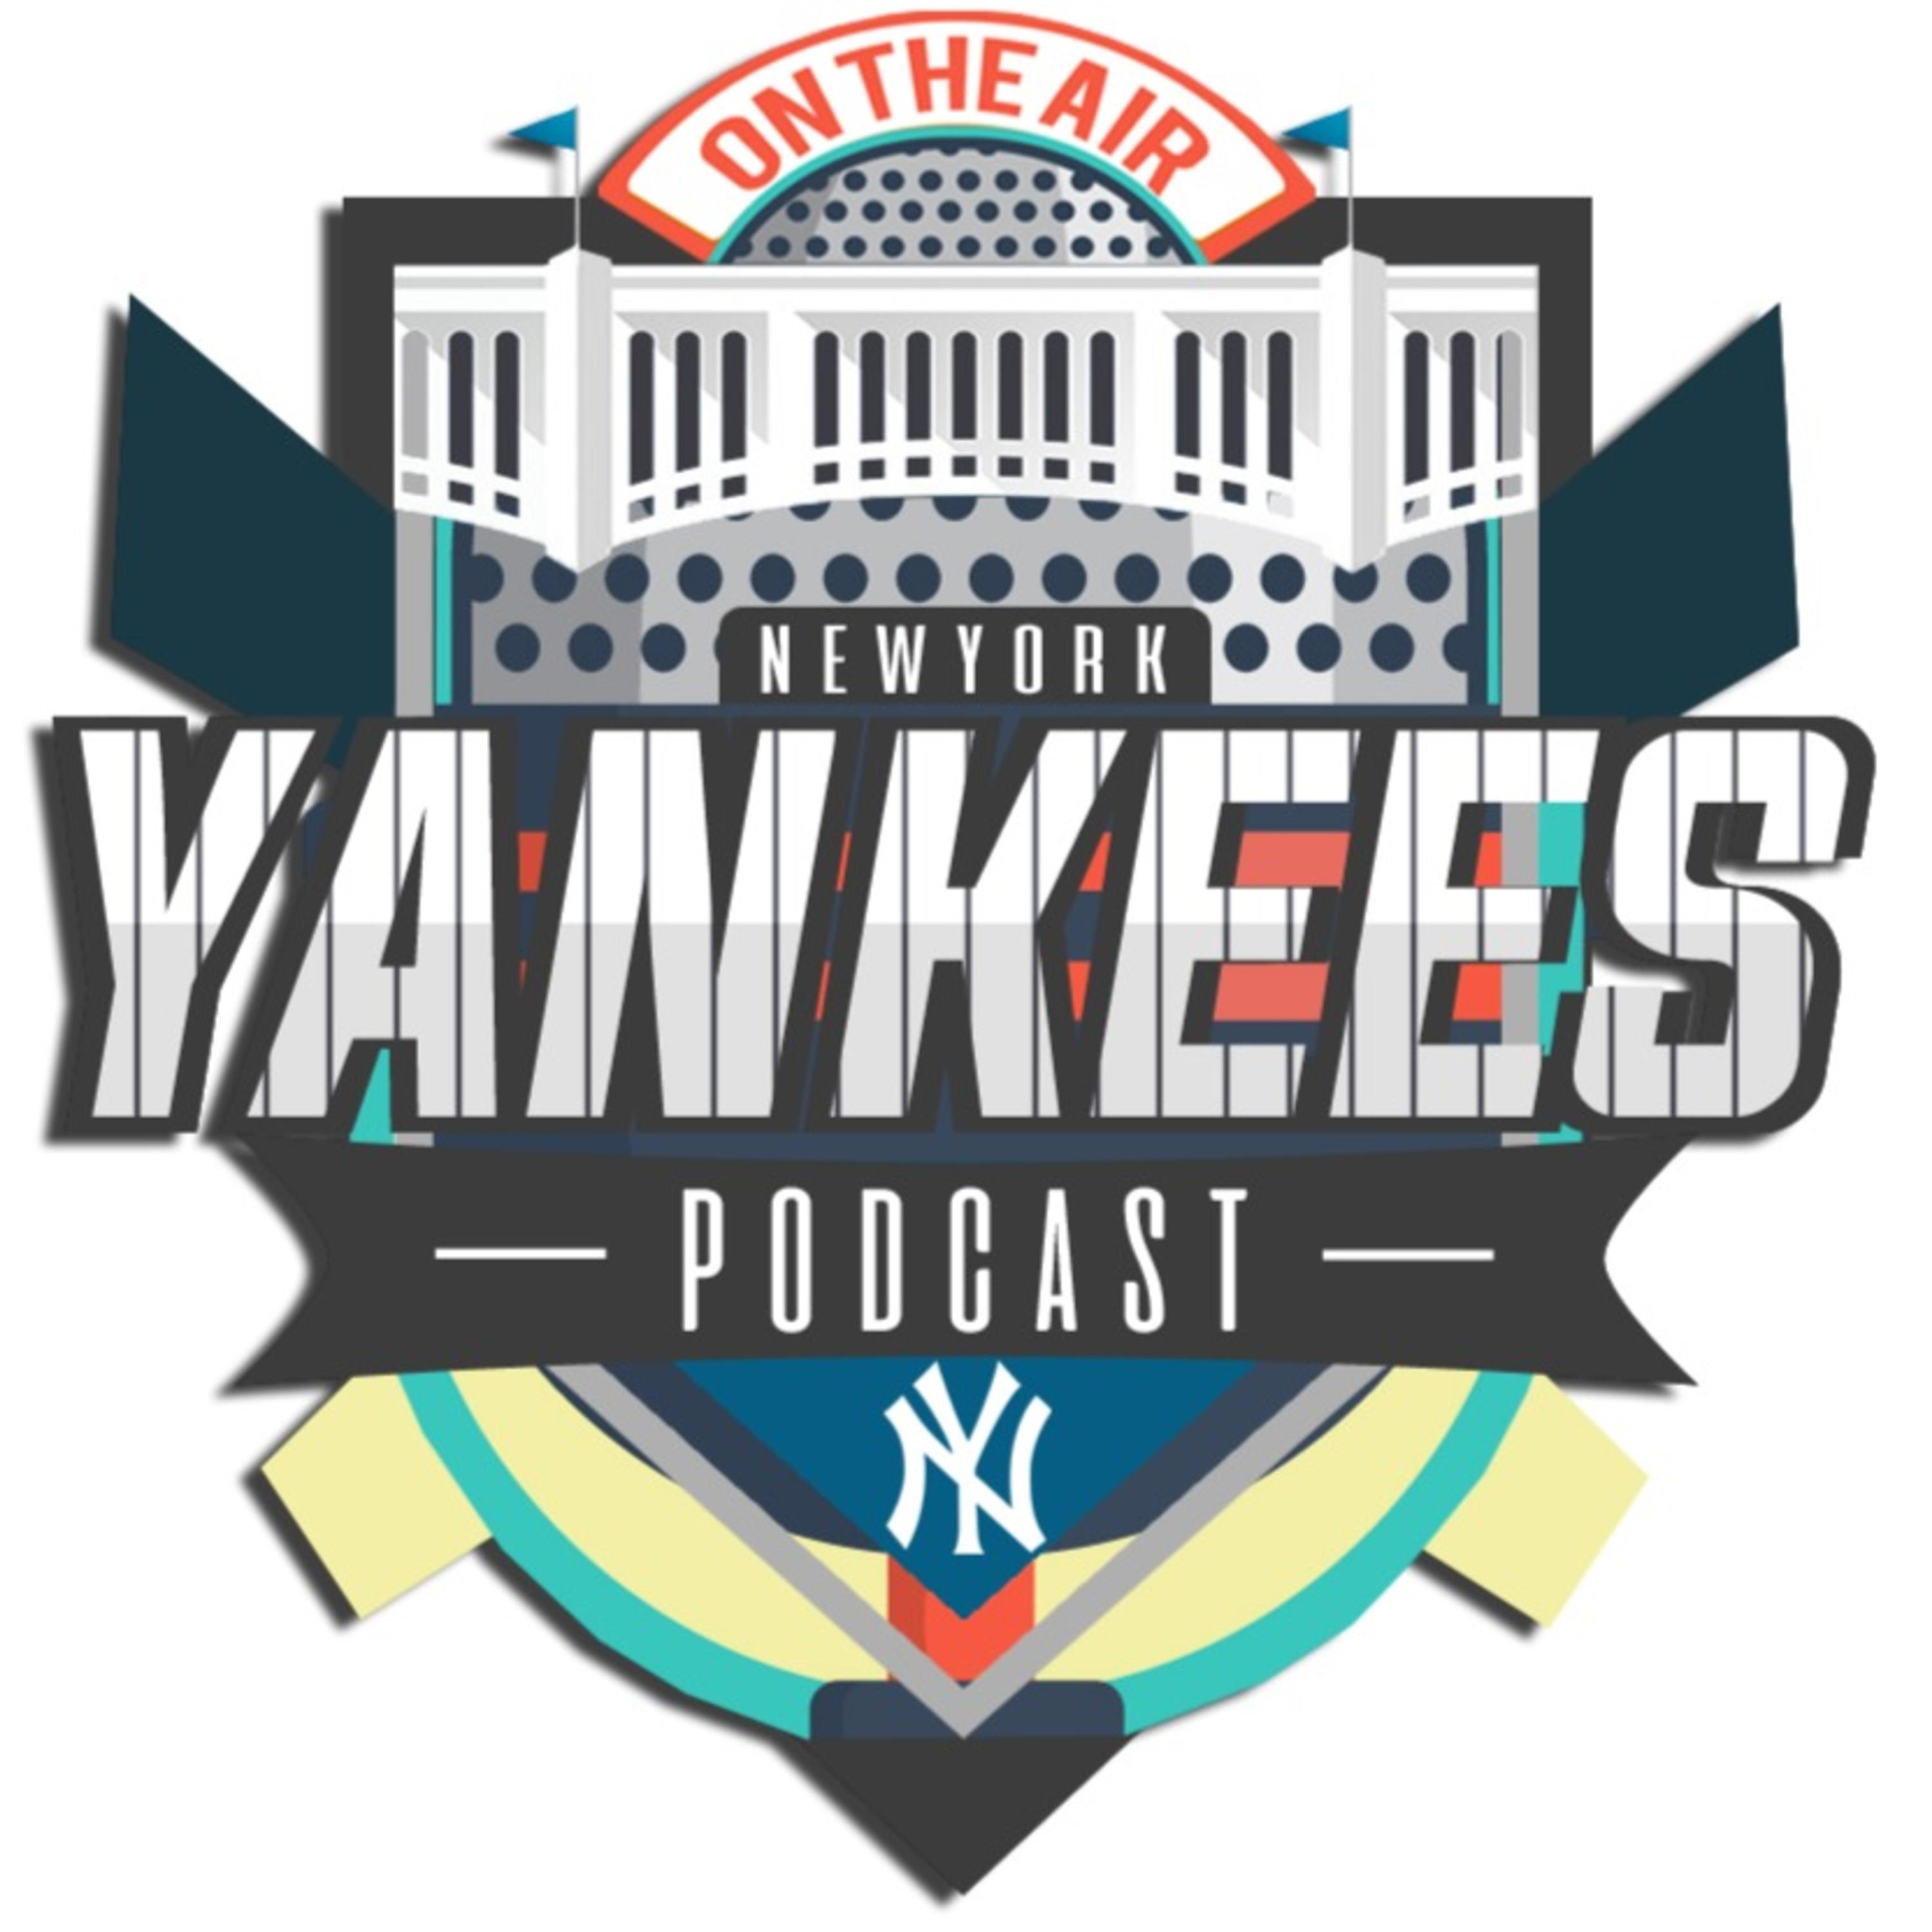 New York Yankees Hungary Podcast - Bé x DS! x Mike - S02EP09